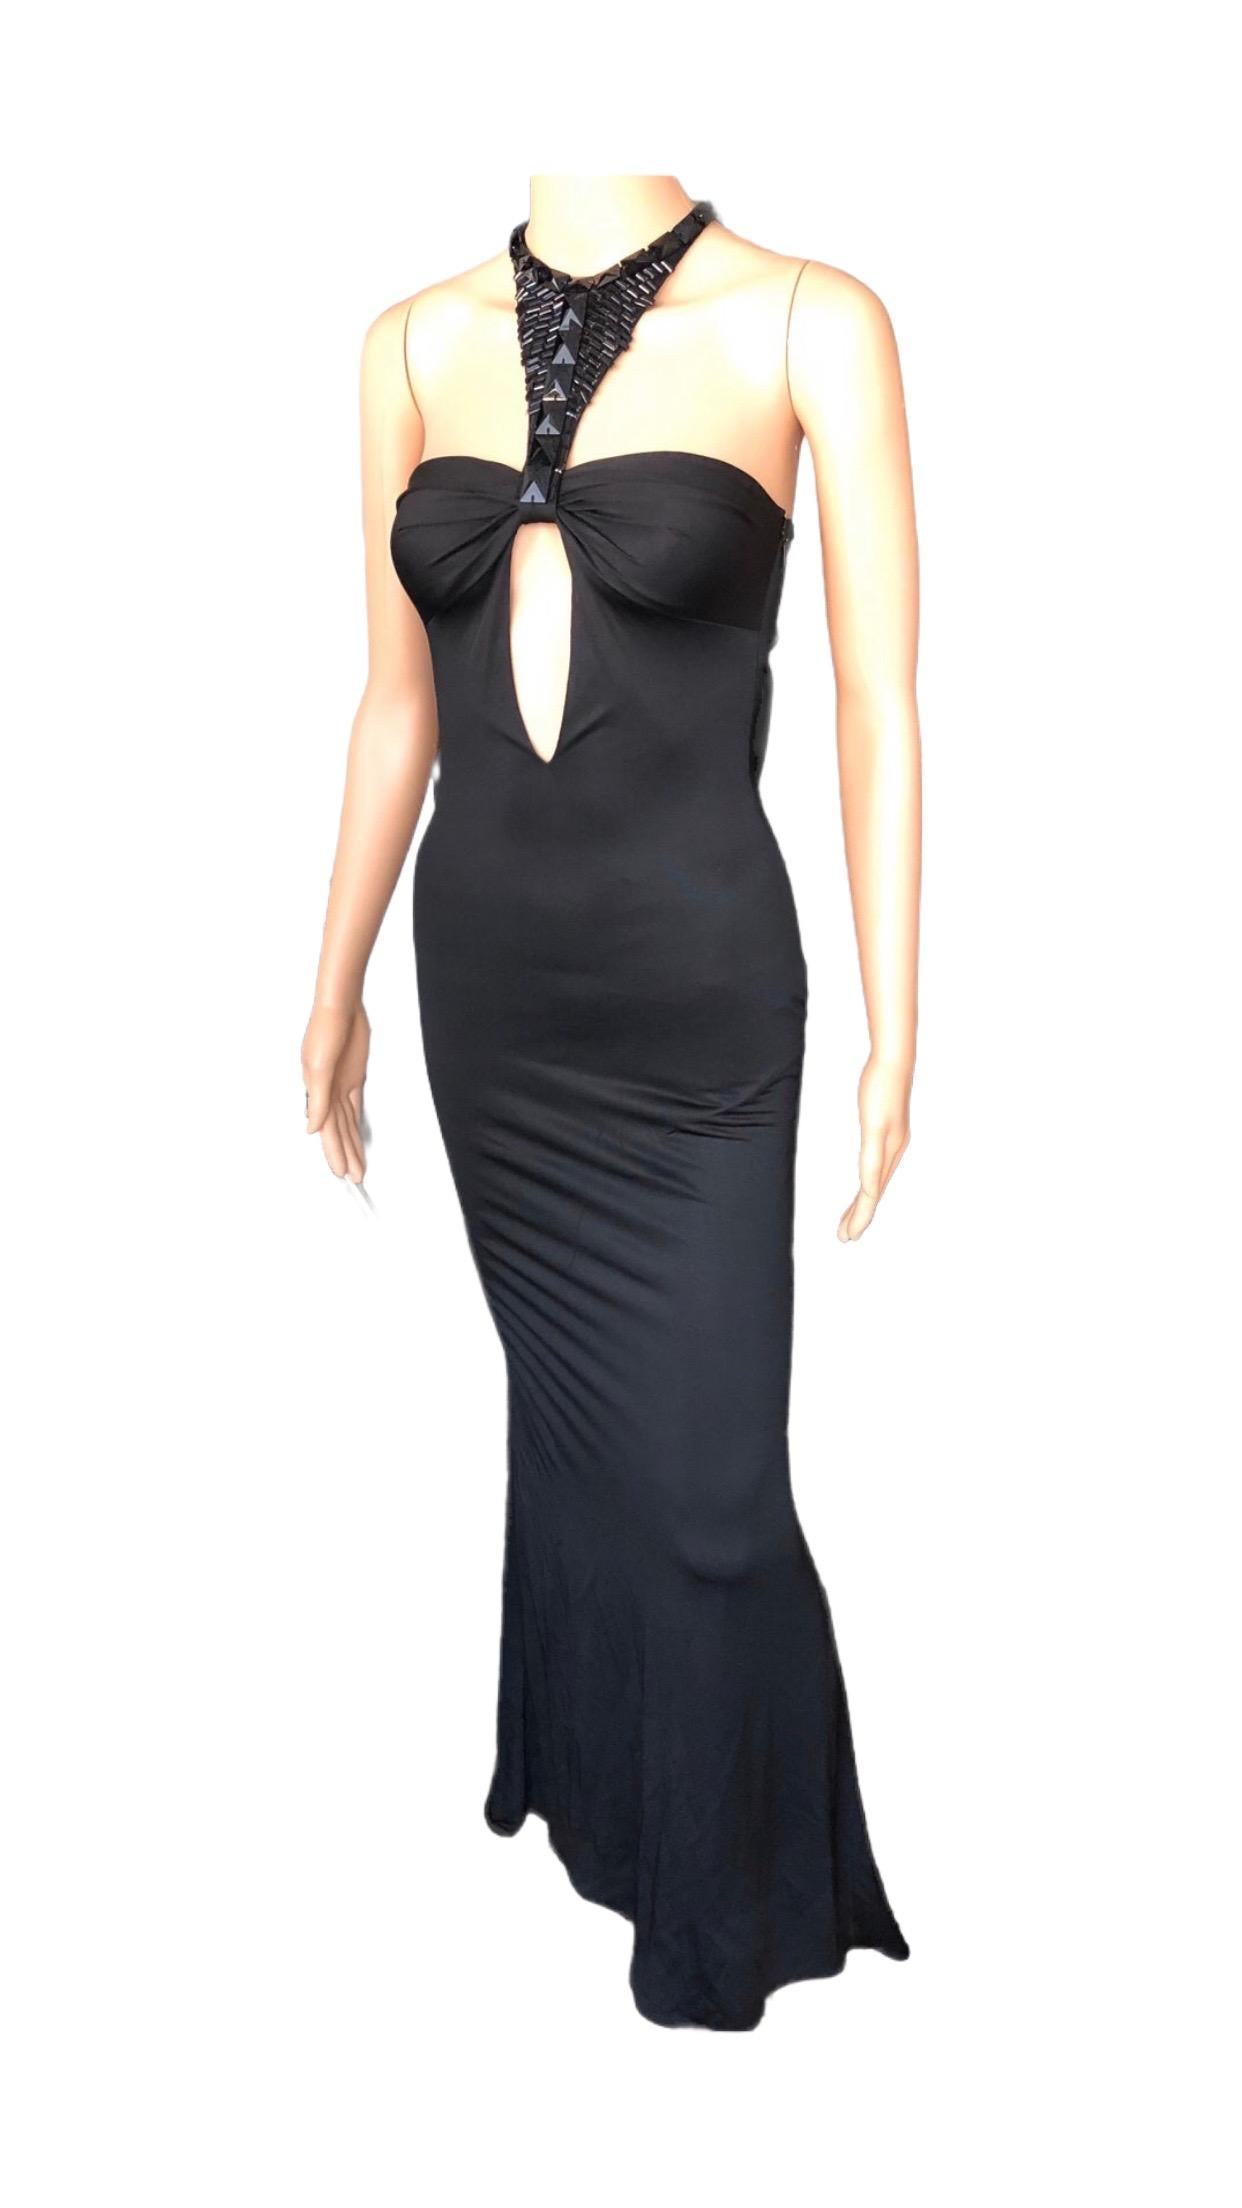 Tom Ford for Gucci F/W 2004 Embellished Plunging Cutout Black Evening Dress Gown For Sale 6